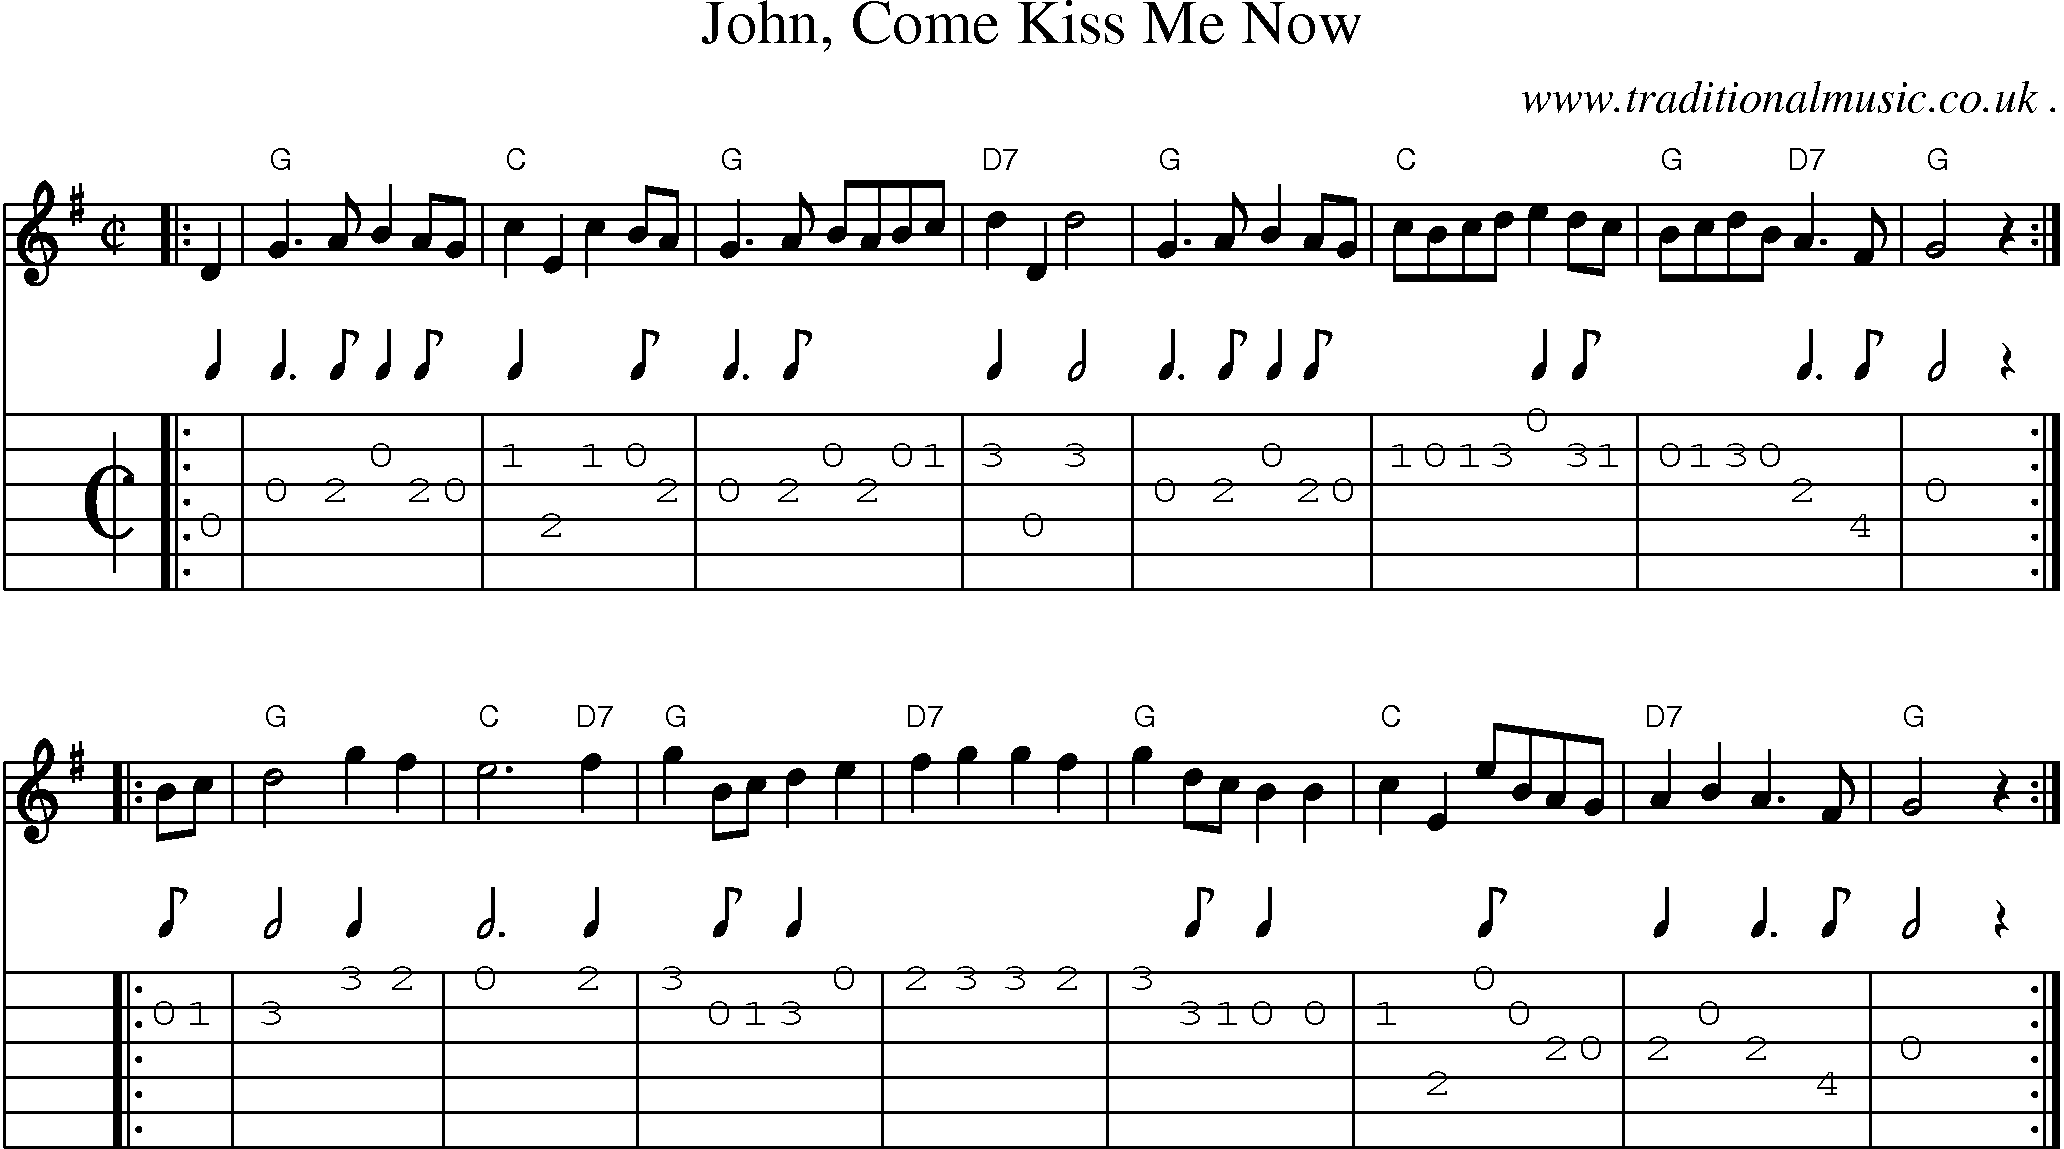 Sheet-music  score, Chords and Guitar Tabs for John Come Kiss Me Now